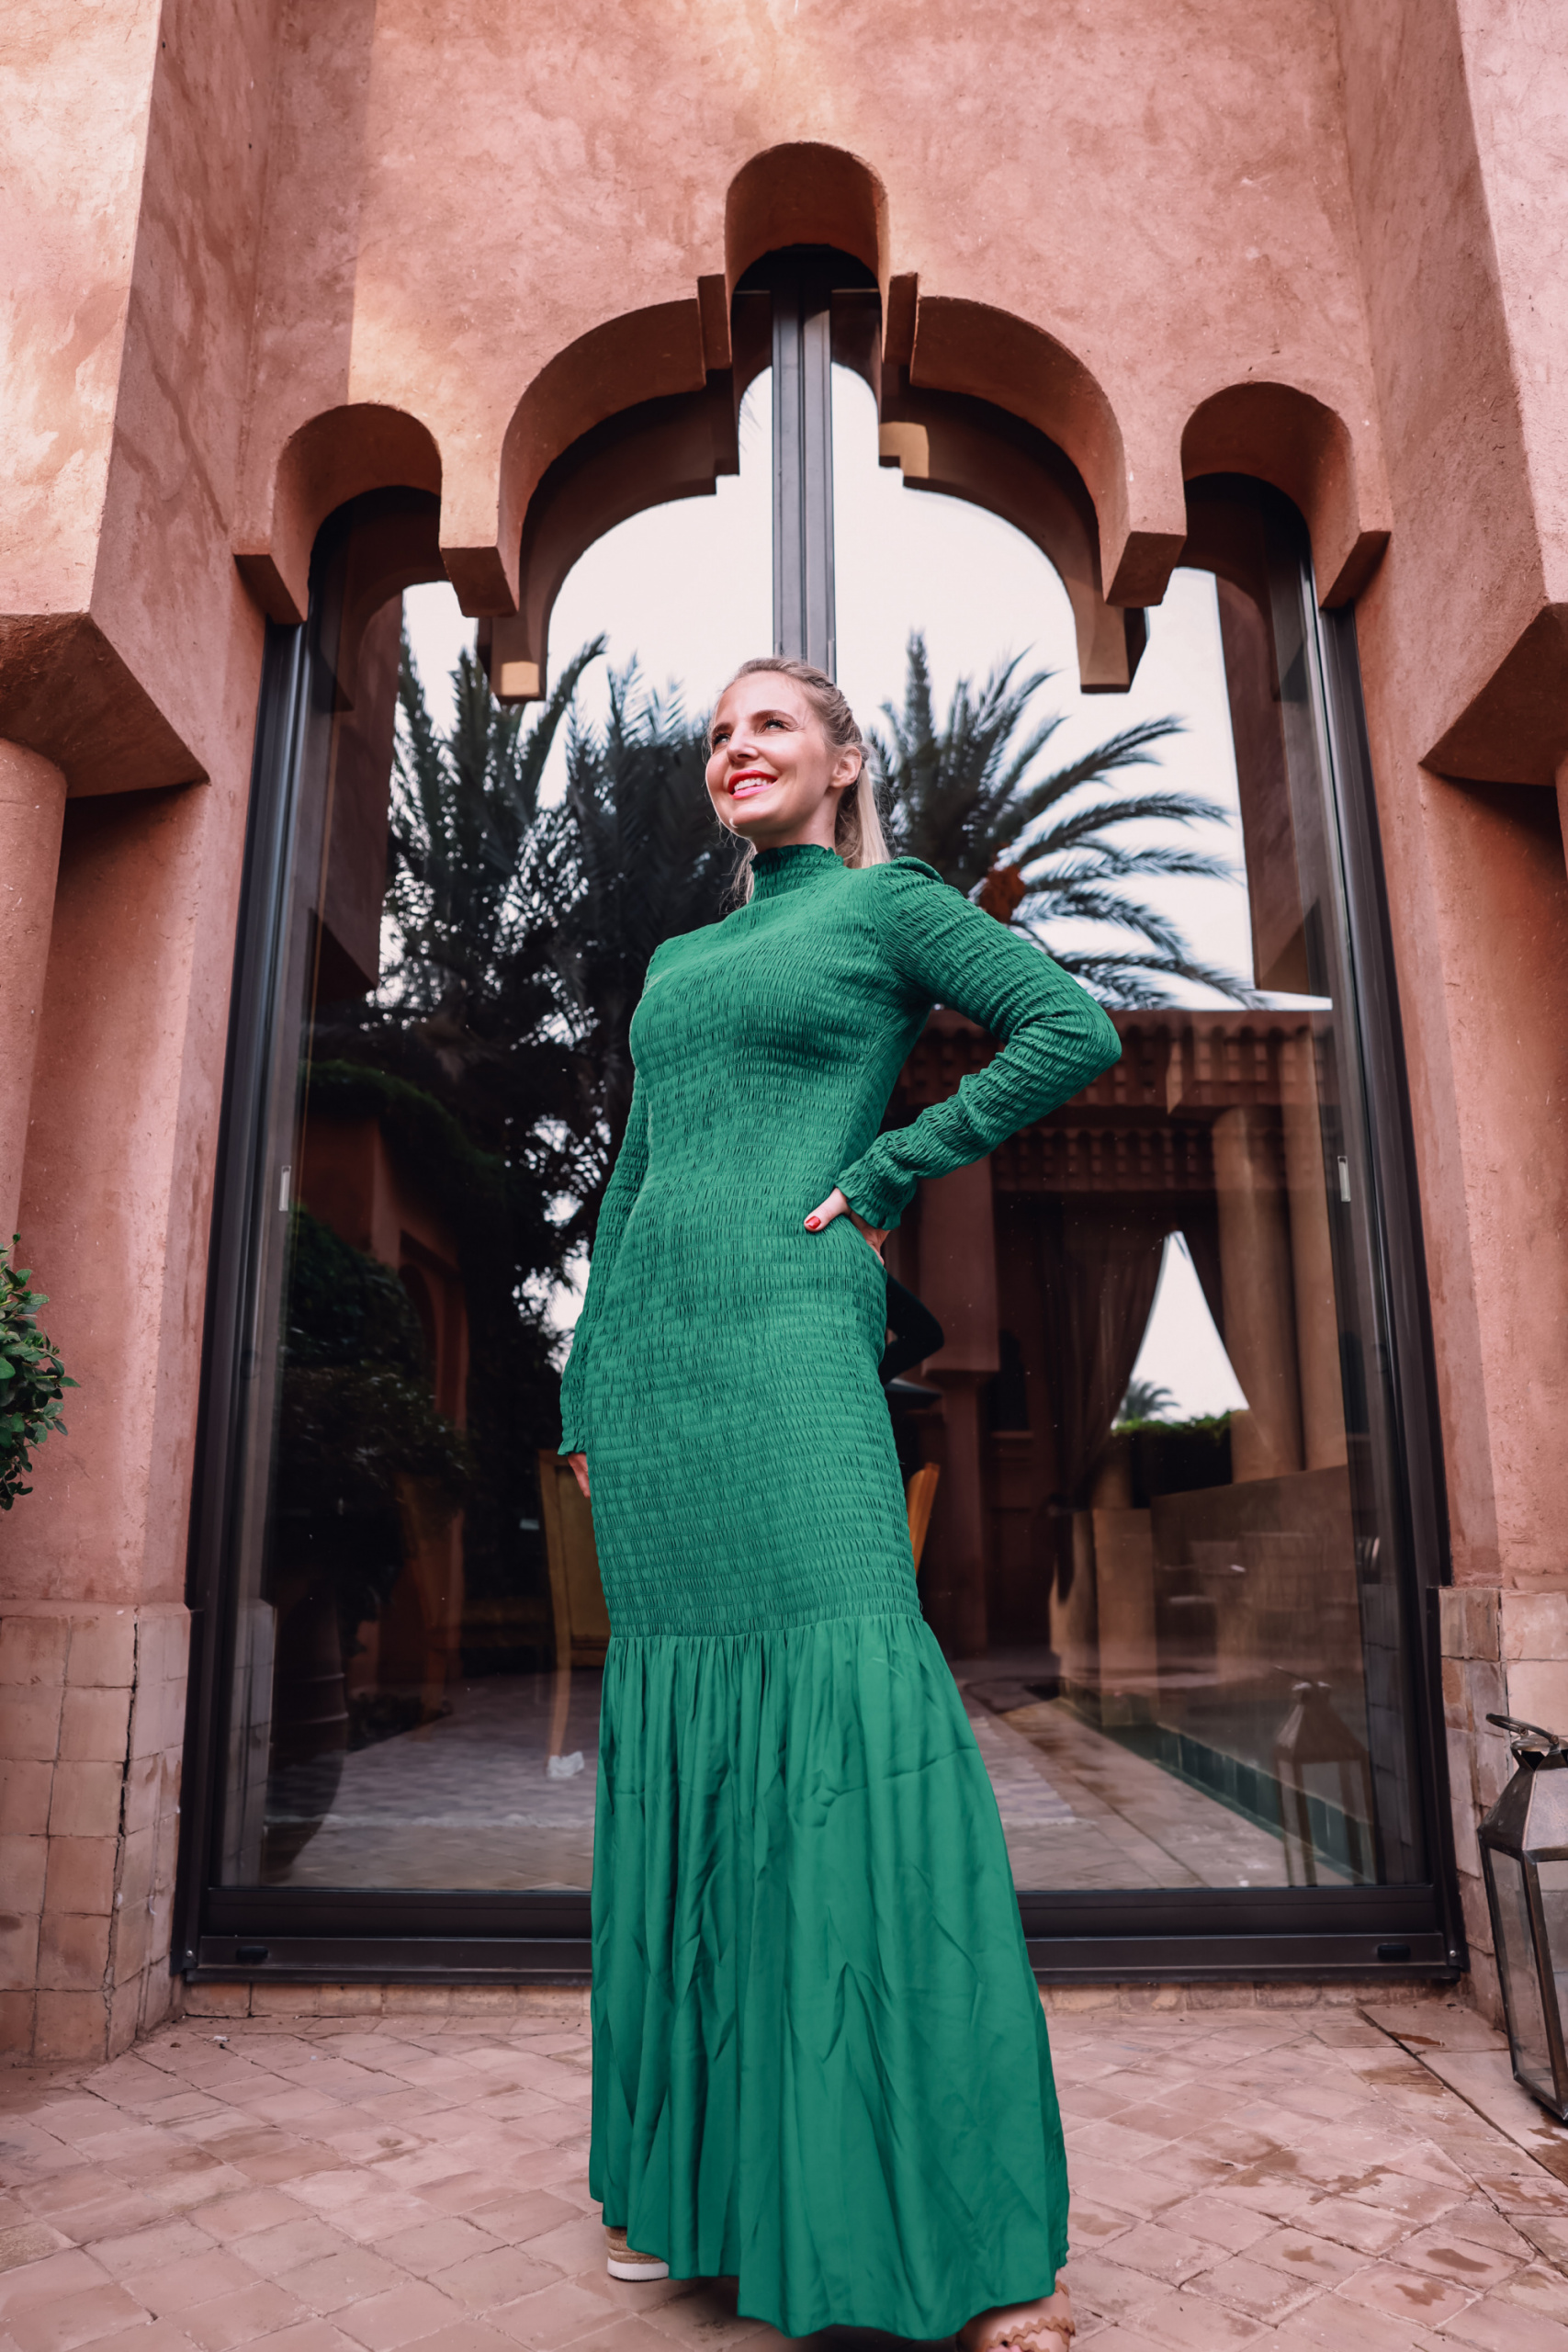 holiday party outfits, holiday party outfits 2021, holiday outfits, christmas party outfits, what to wear holiday, holiday outfits over 40, what to wear to holiday party, green & other stories dress, erin busbee, marrakesh, morocco